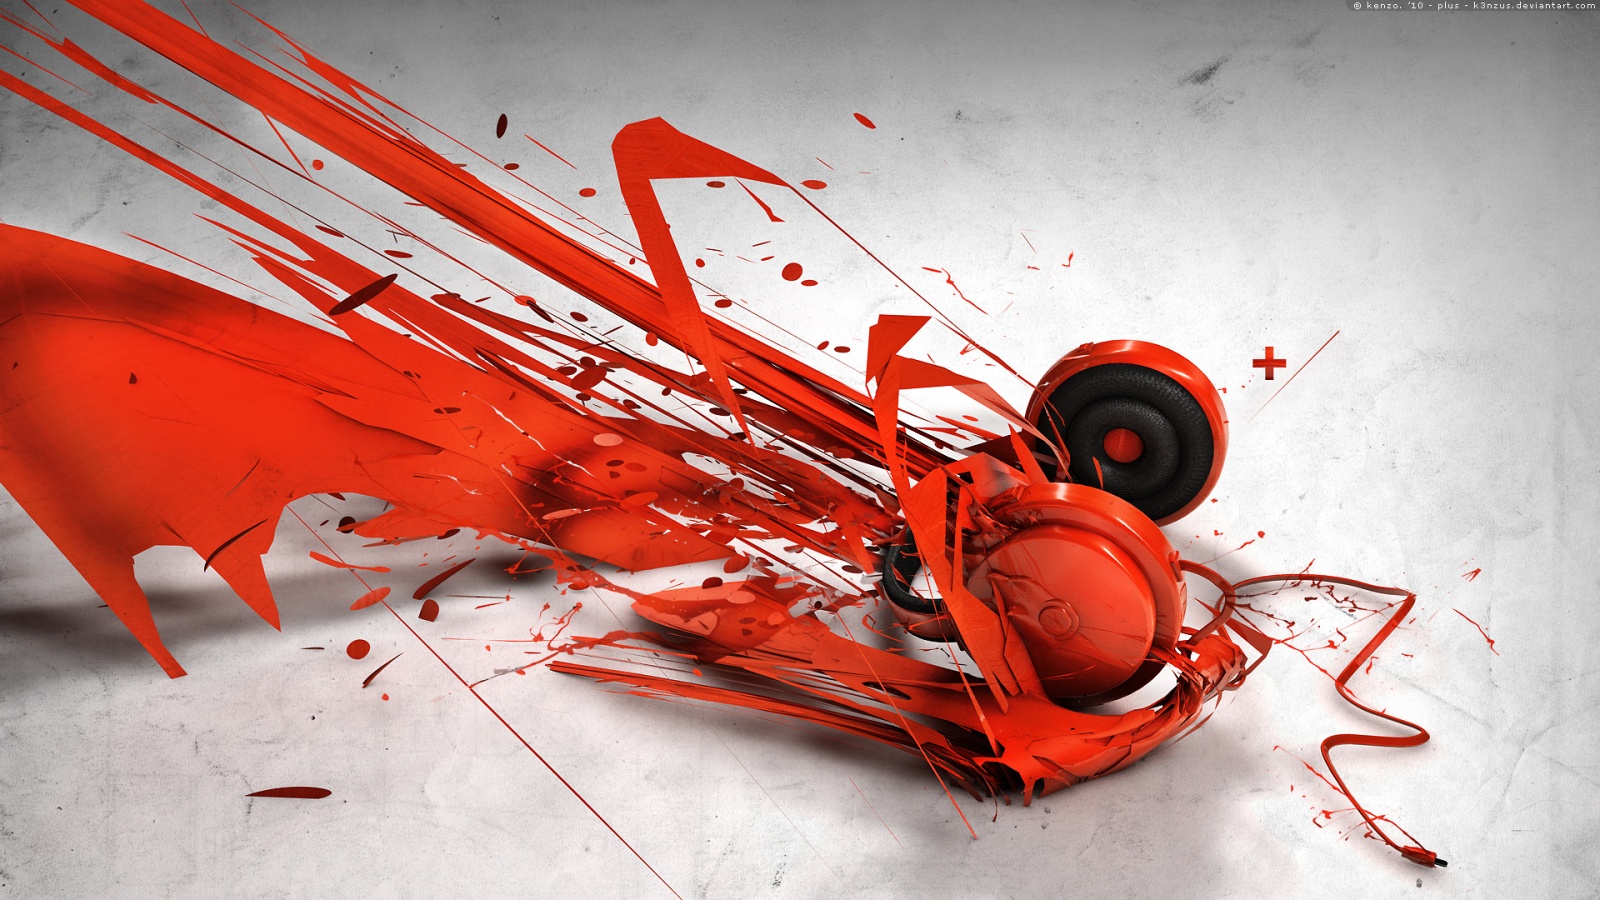 Abstract Music Headphones Wallpapers | HD Wallpapers